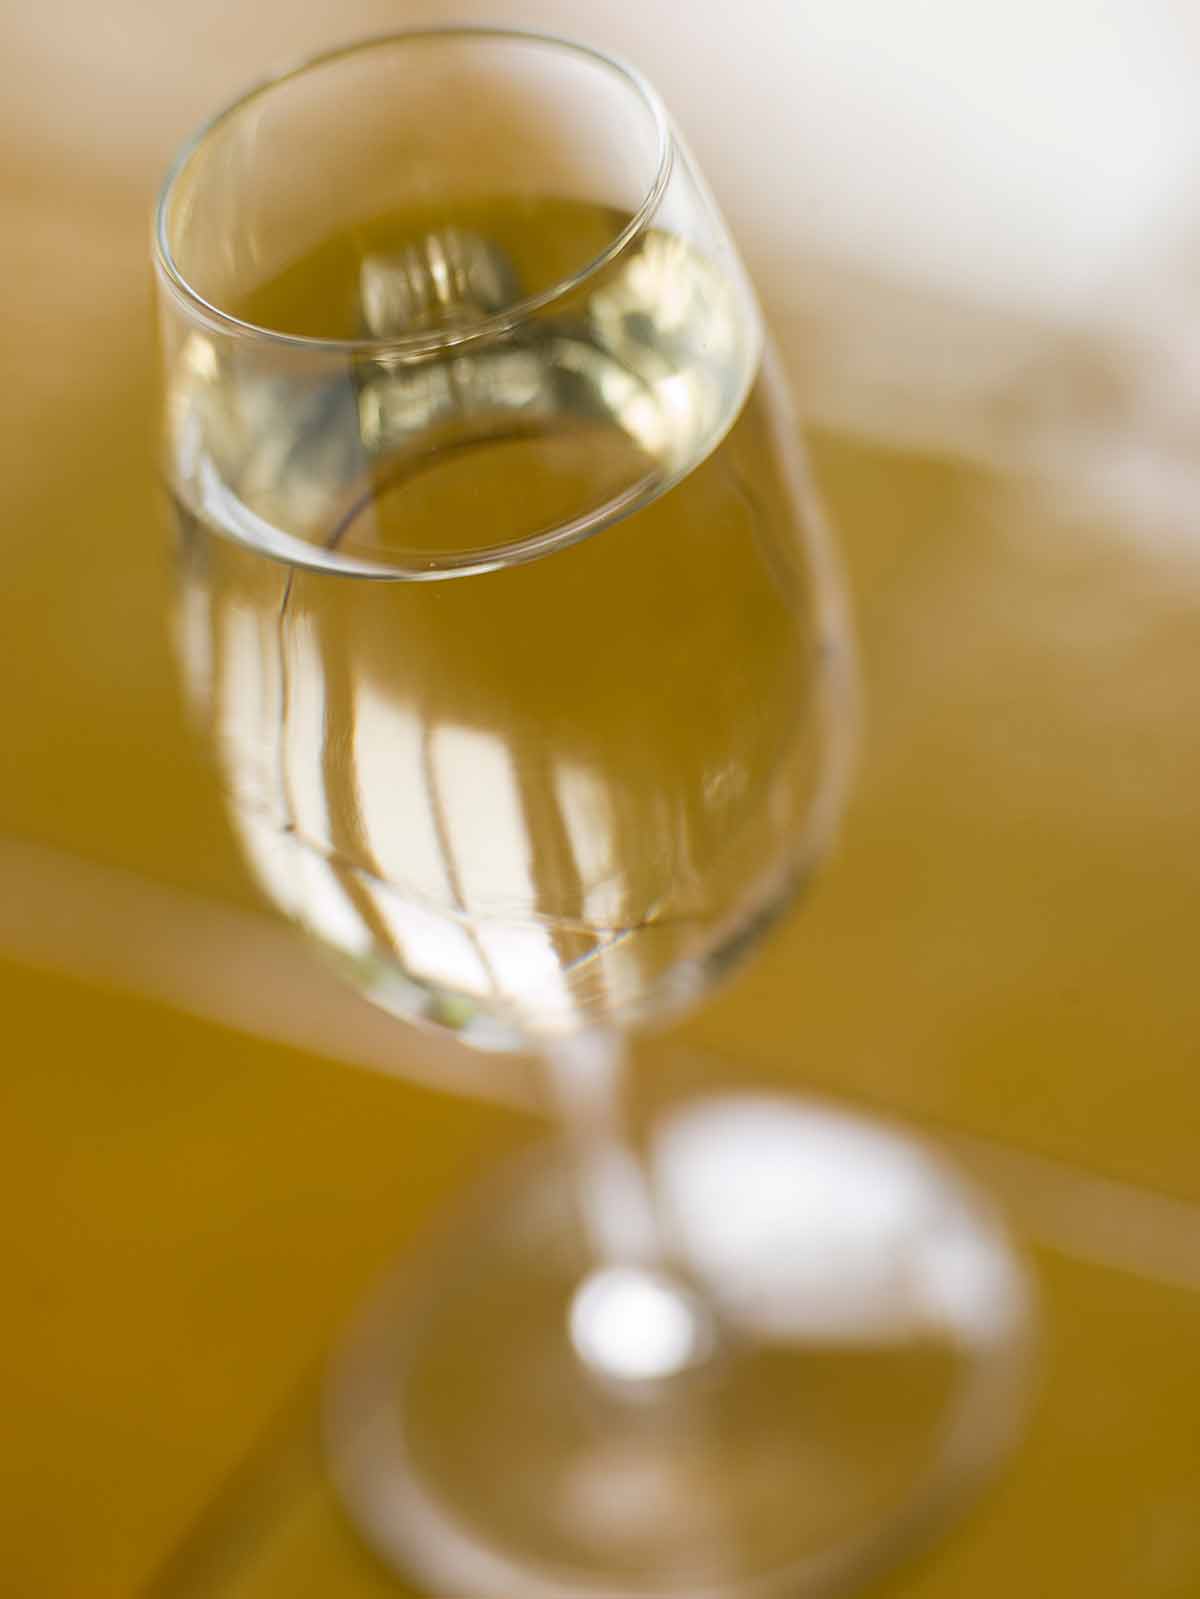 Spanish drinks dry sherry in a long-stemmed glass